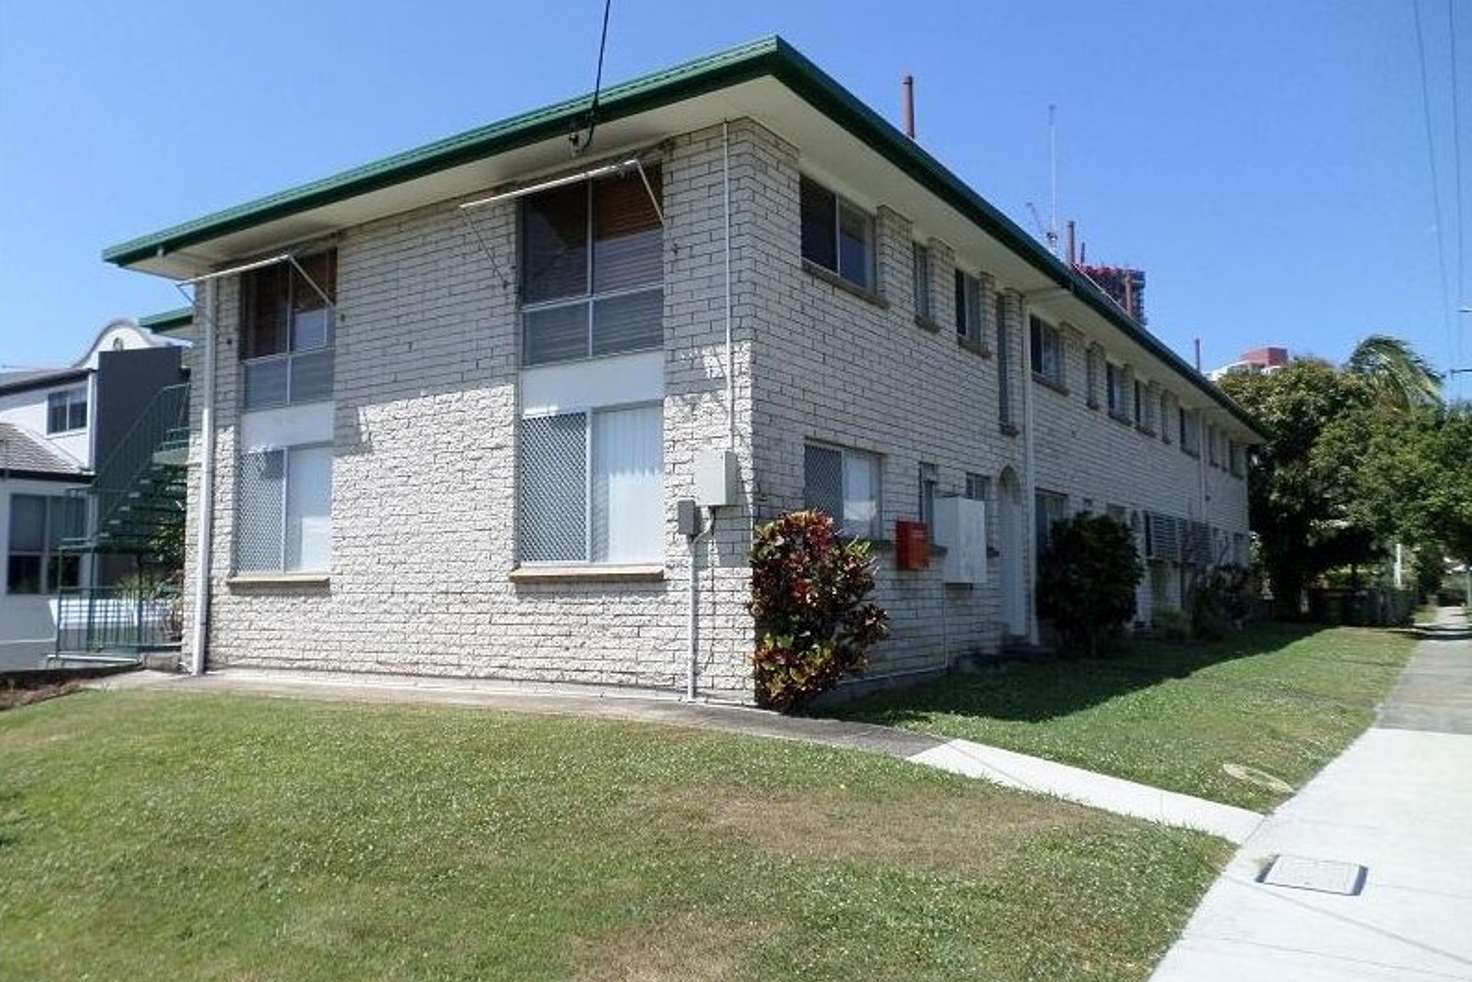 Main view of Homely apartment listing, 25 Lenneberg Street, Southport QLD 4215